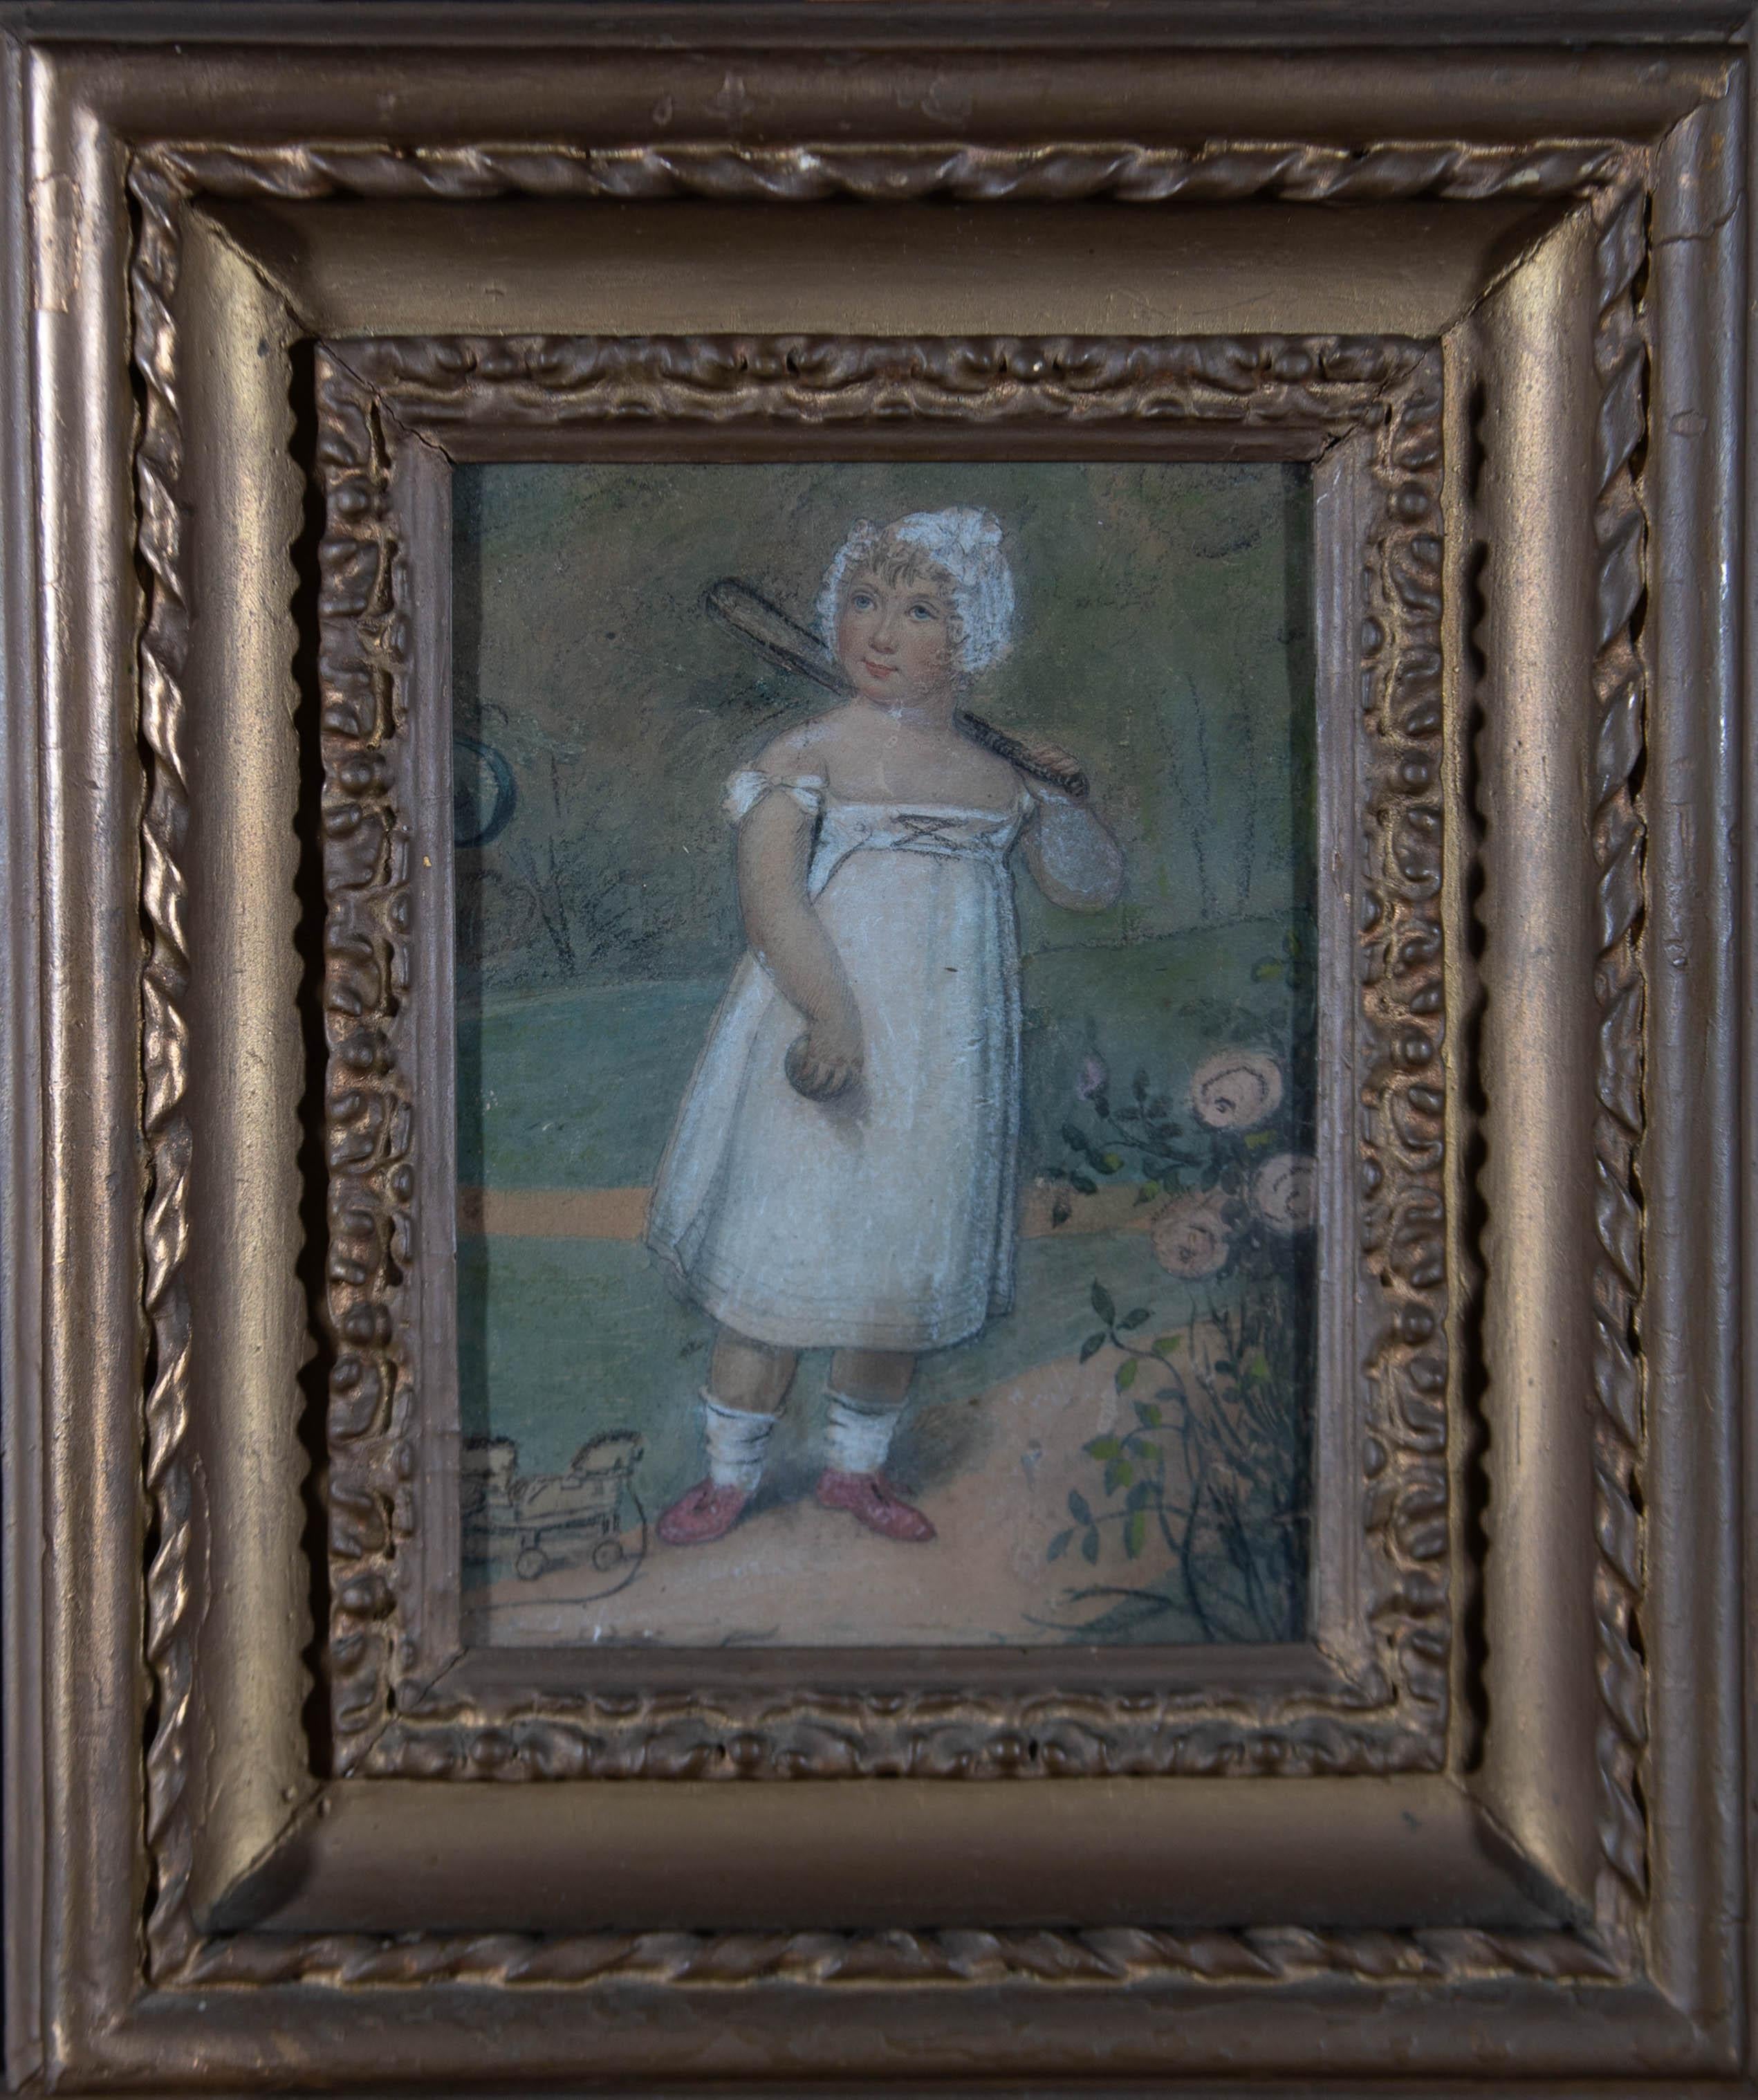 Unknown Portrait - Early 19th Century Watercolour - Child at Play